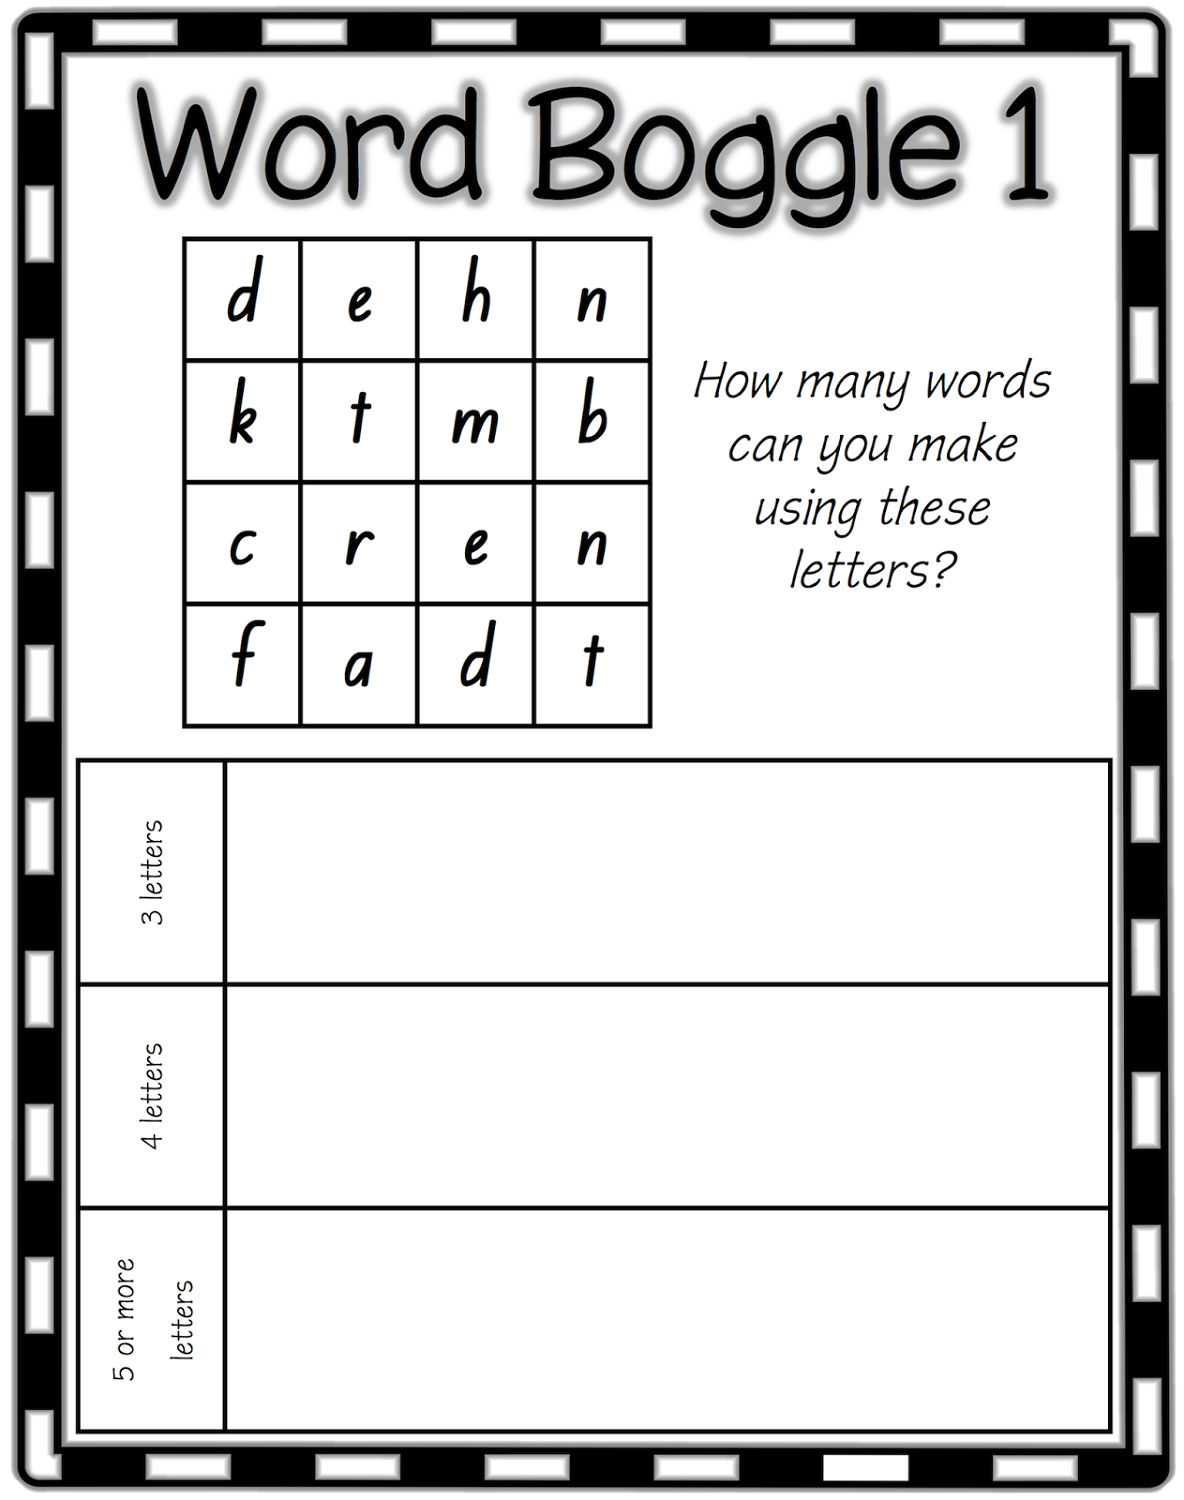 boggle-word-games-activity-shelter